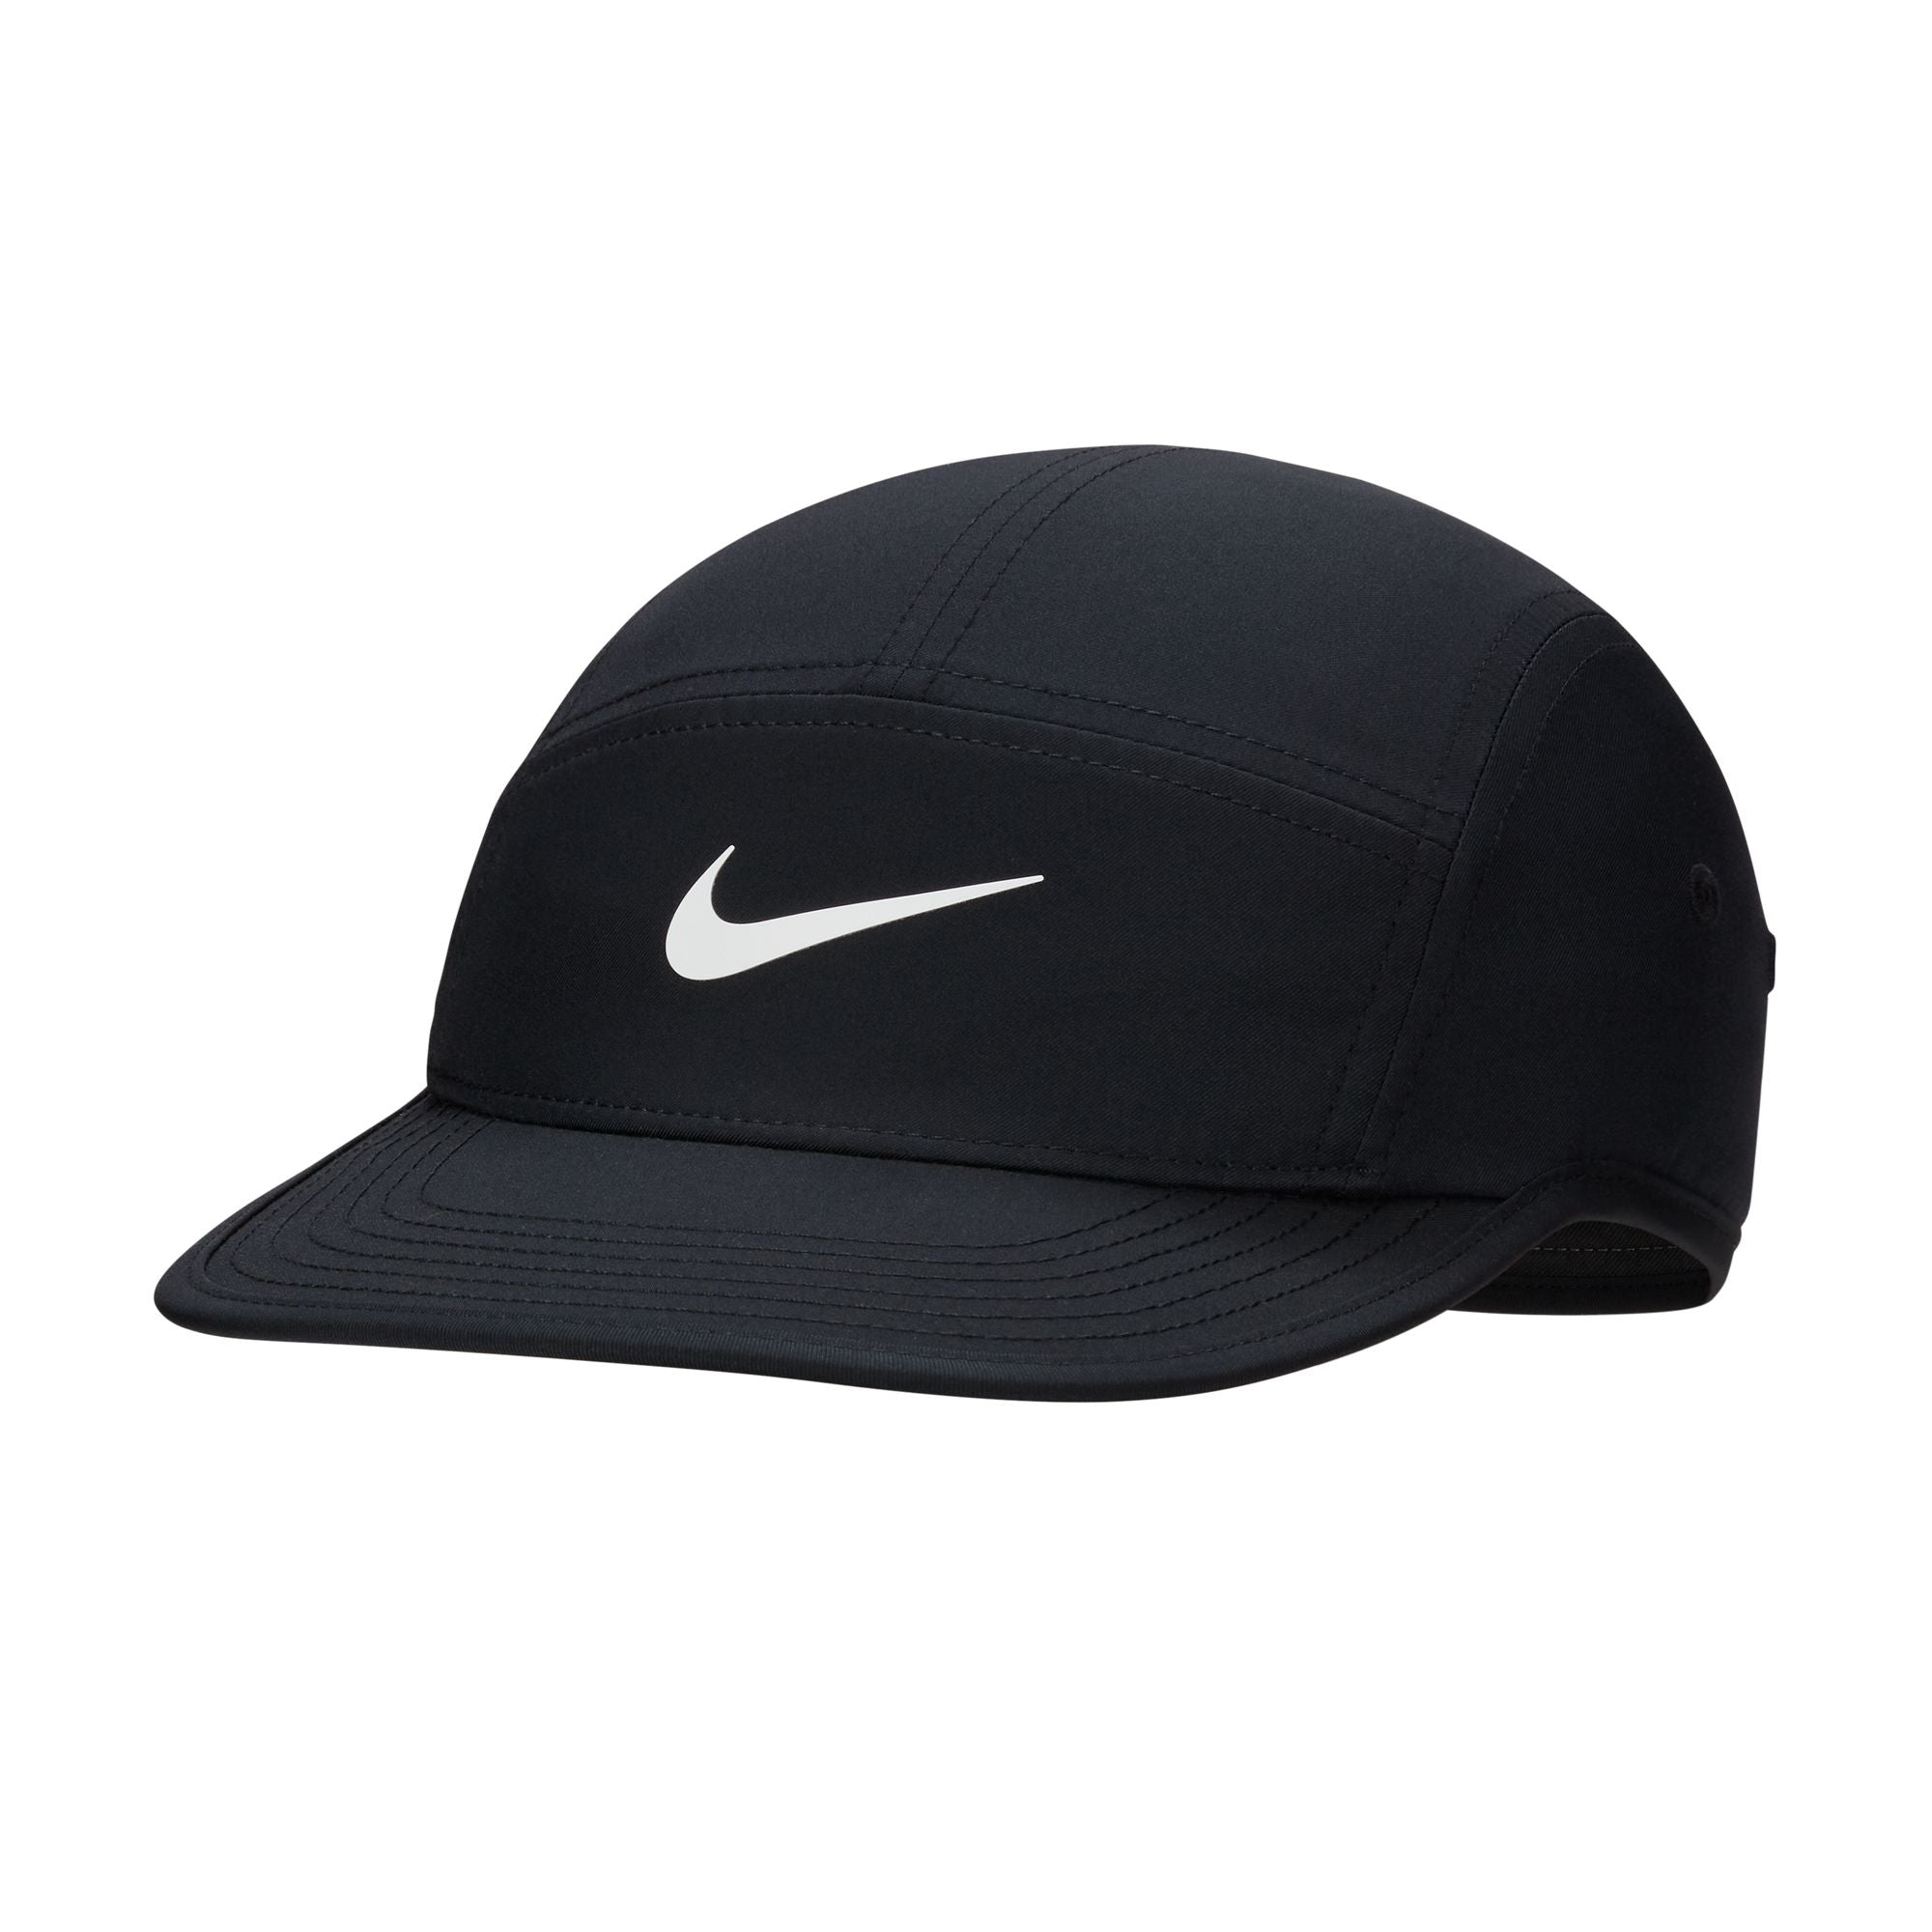 Nike Dri-Fit Unstructured Fly Cap - Black/Anthracite/White